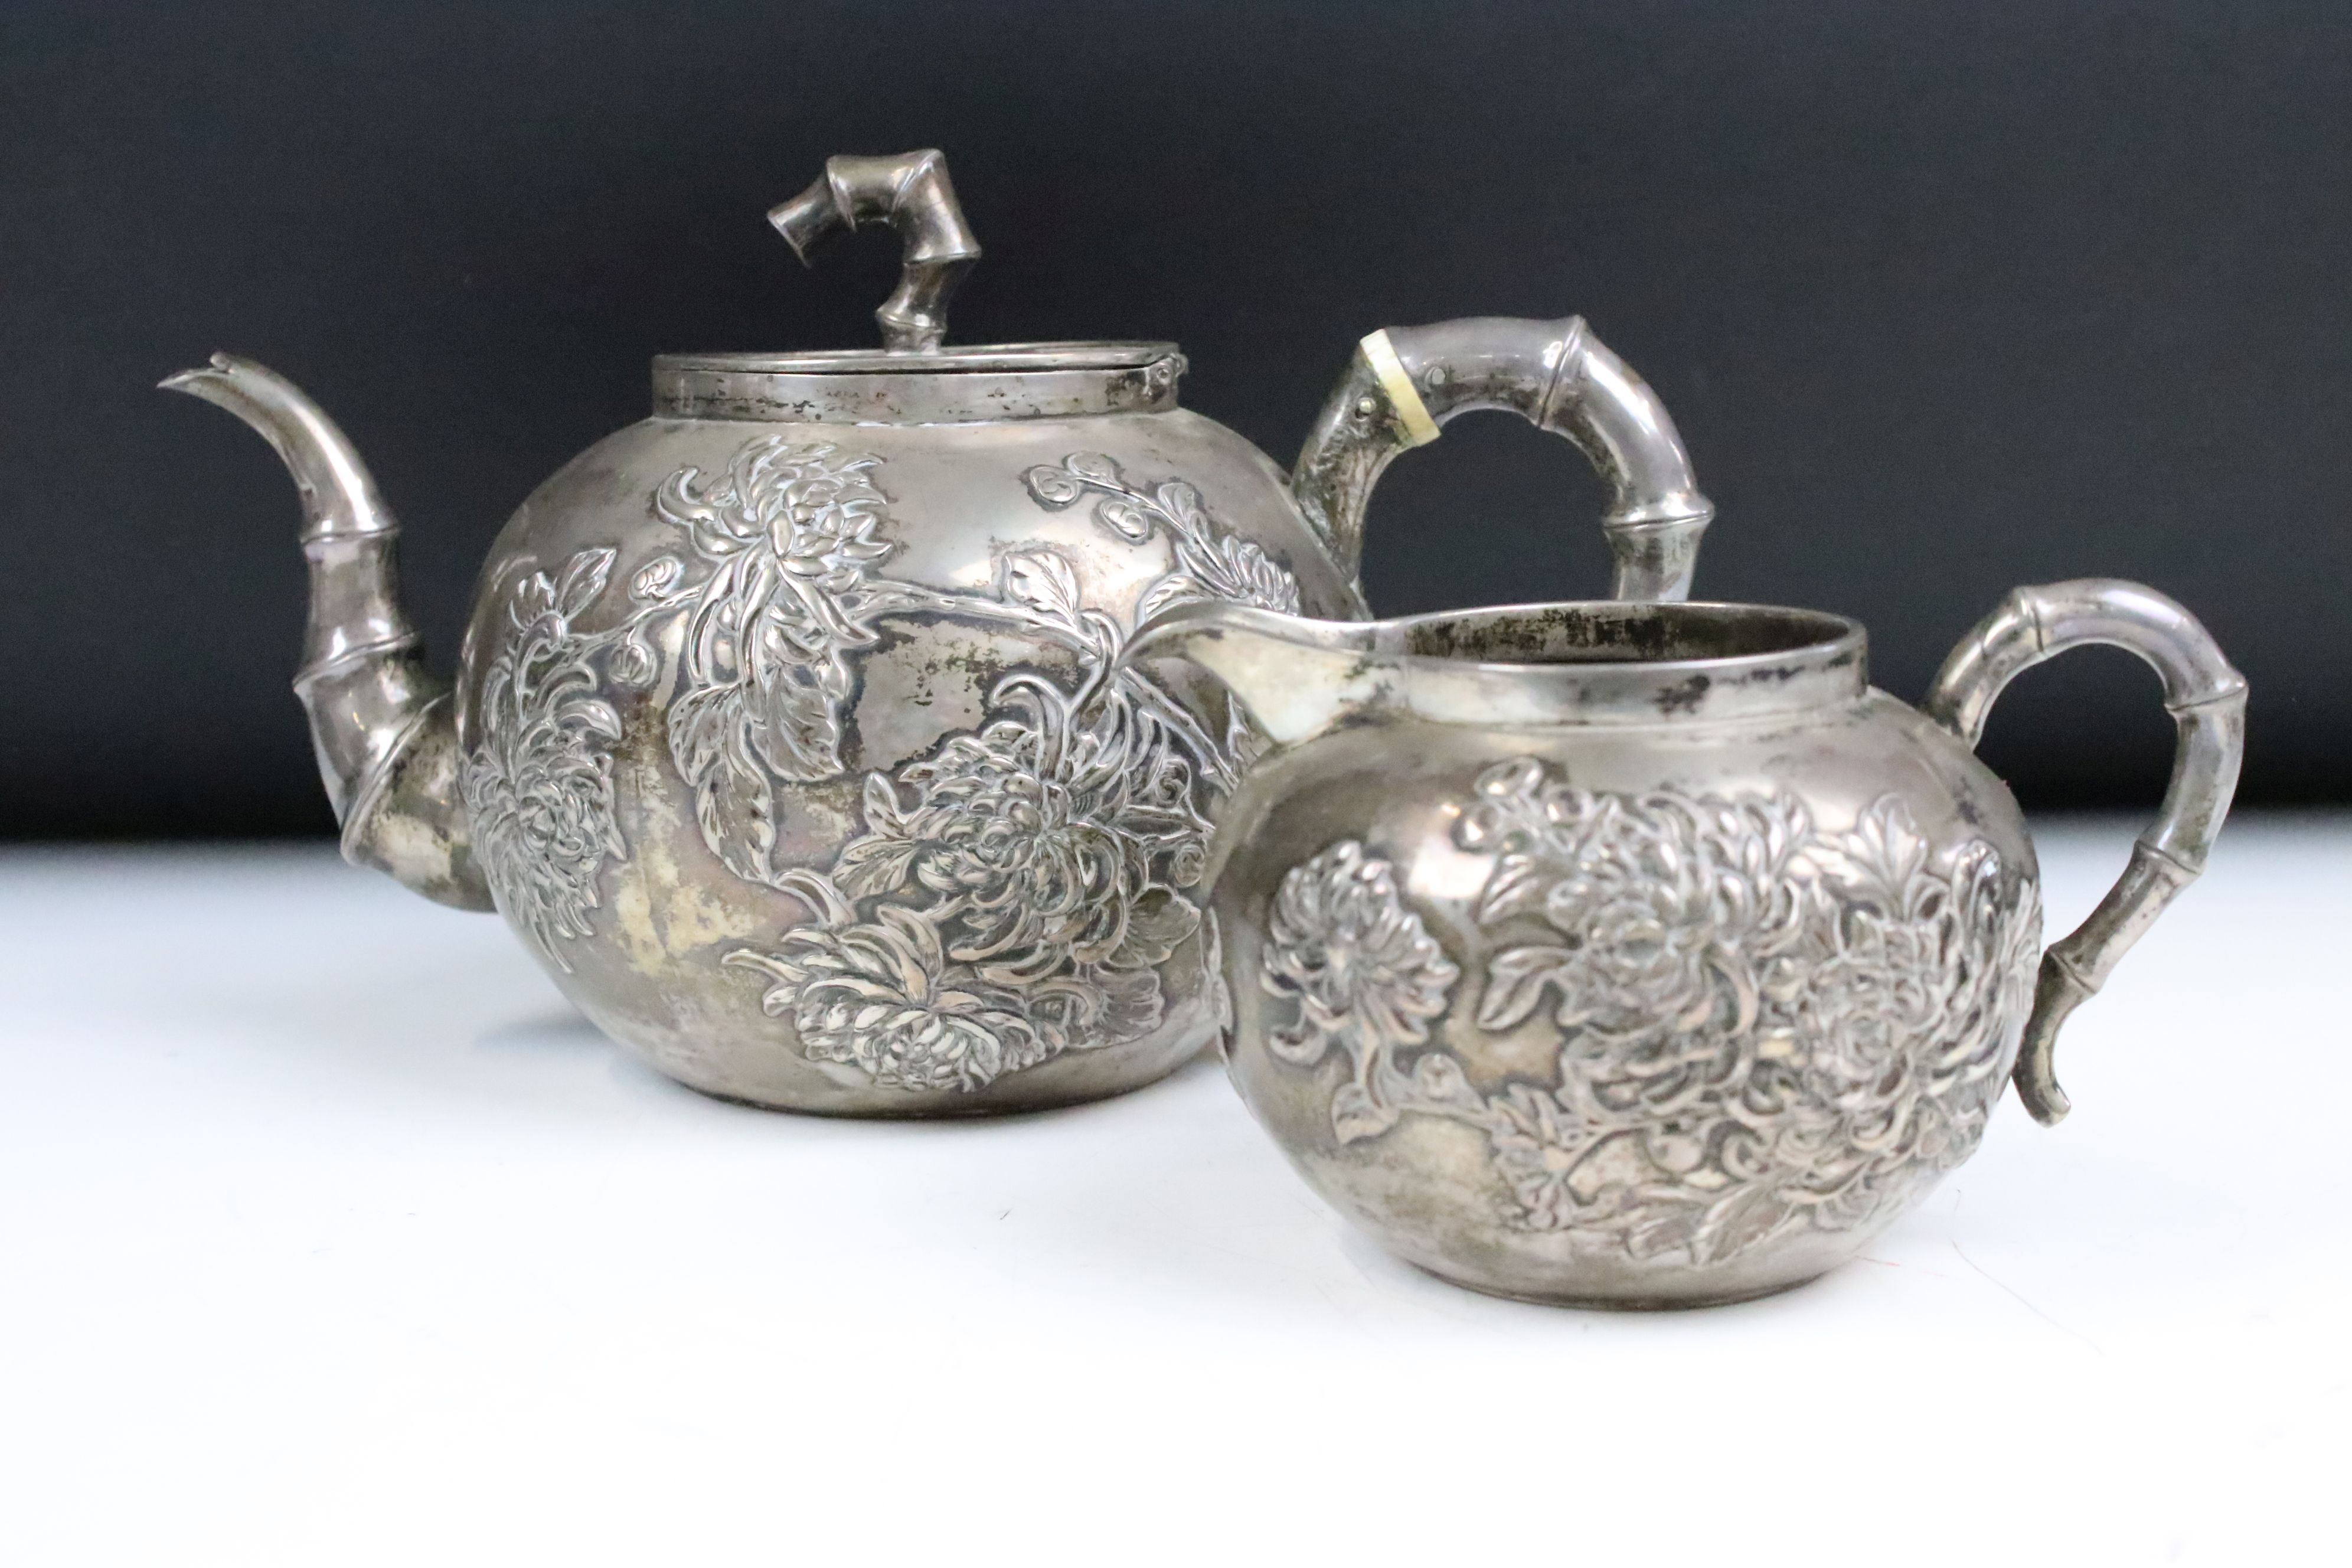 An antique Chinese silver teapot cast with cherry blossom decoration and bamboo style handles and